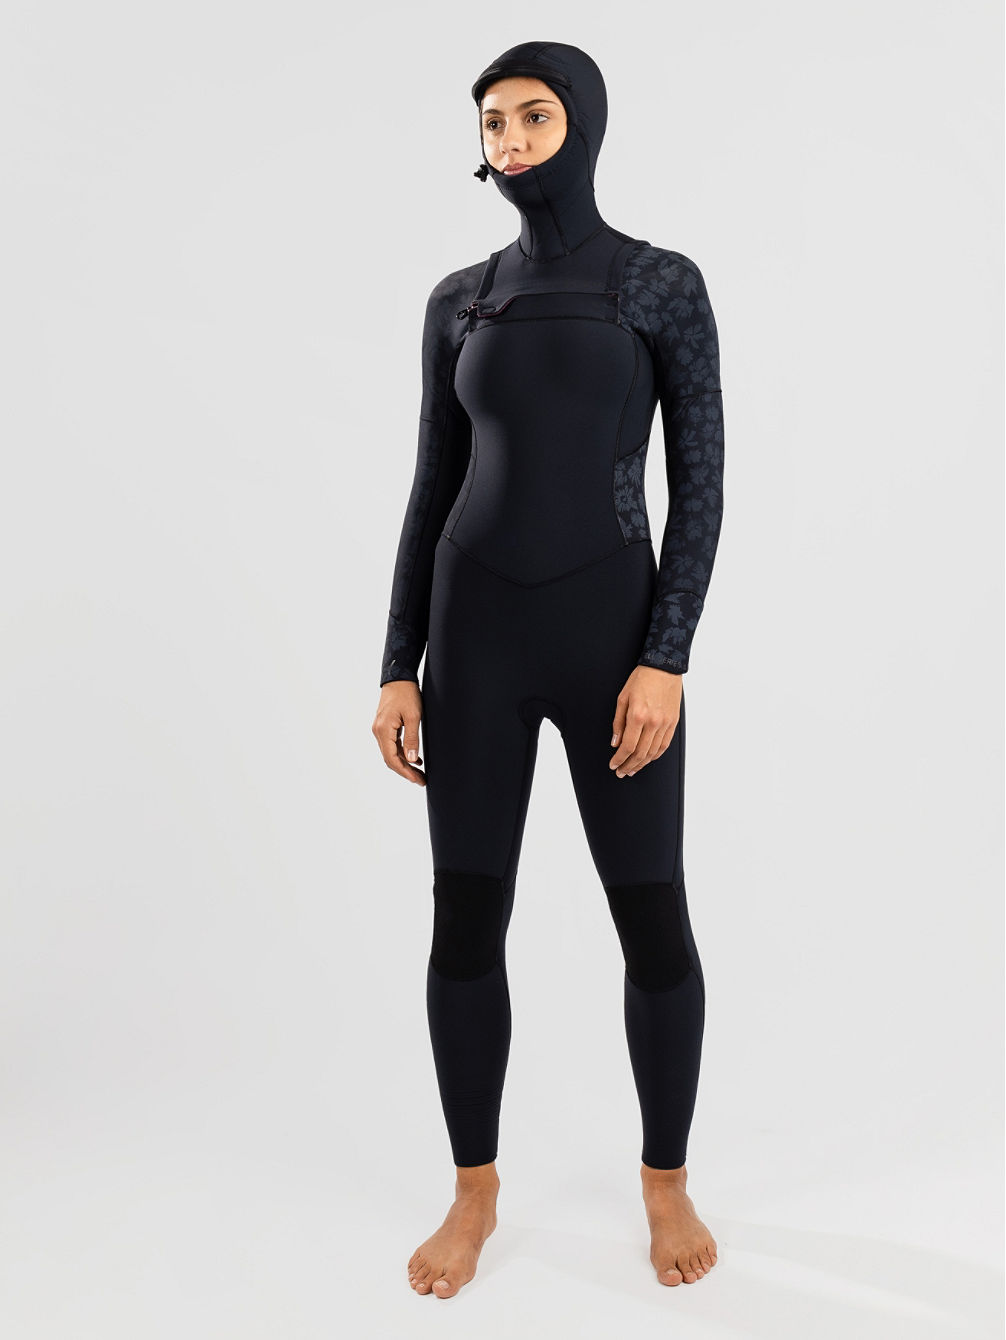 5/4/3 Swell S Hooded Fz Gbs Wetsuit